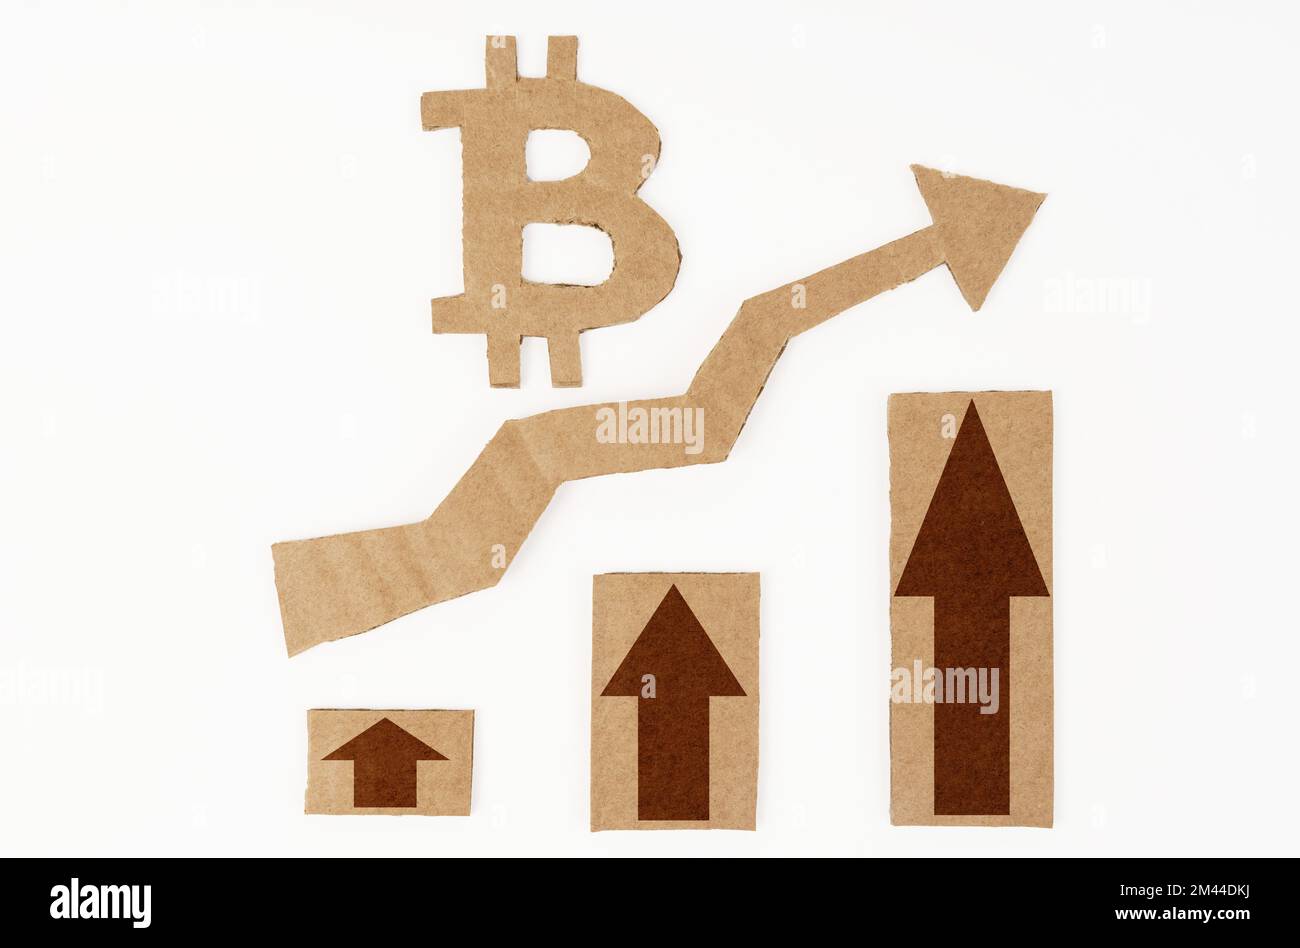 The concept of economic growth. On a white surface, a graph with up arrows and a bitcoin symbol. Symbol, arrow and graph are made of cardboard Stock Photo